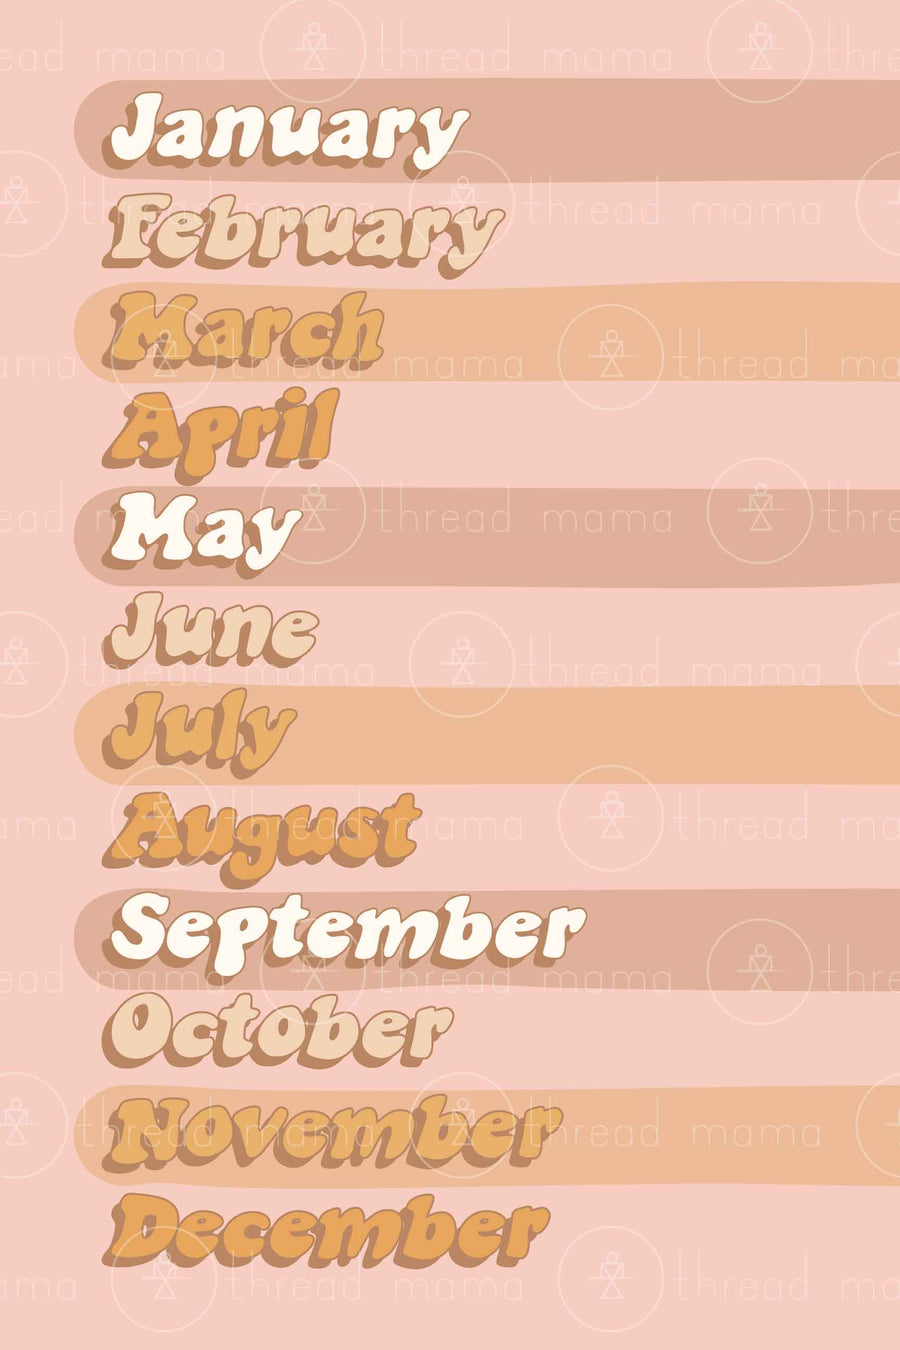 Months of the Year (Printable Poster)